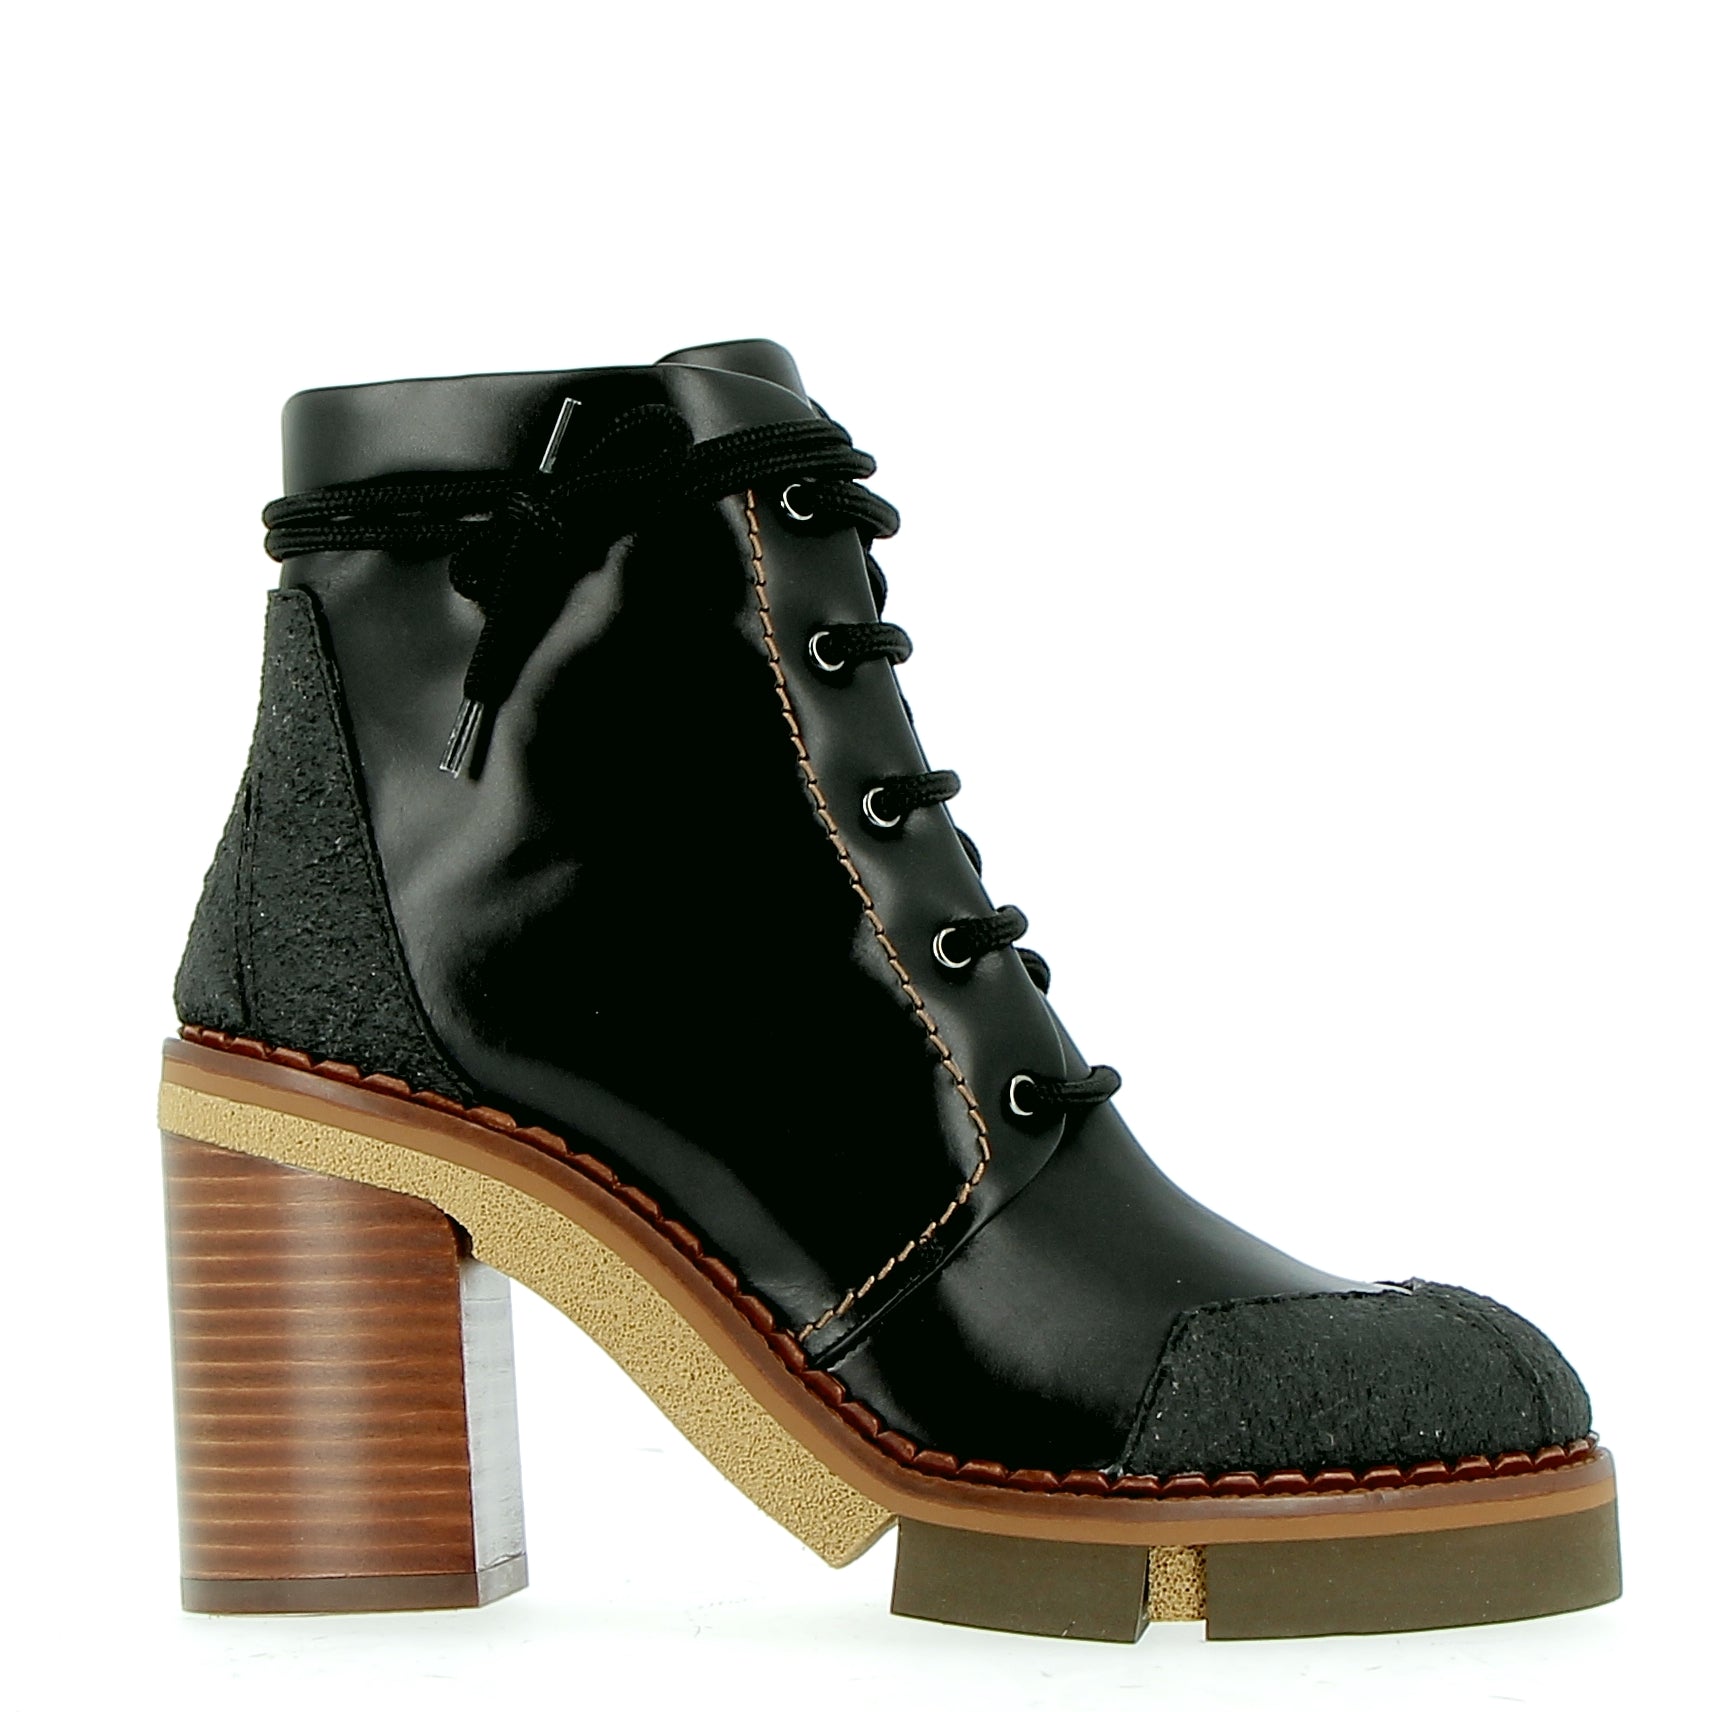 Black lace-up ankle boot with heel